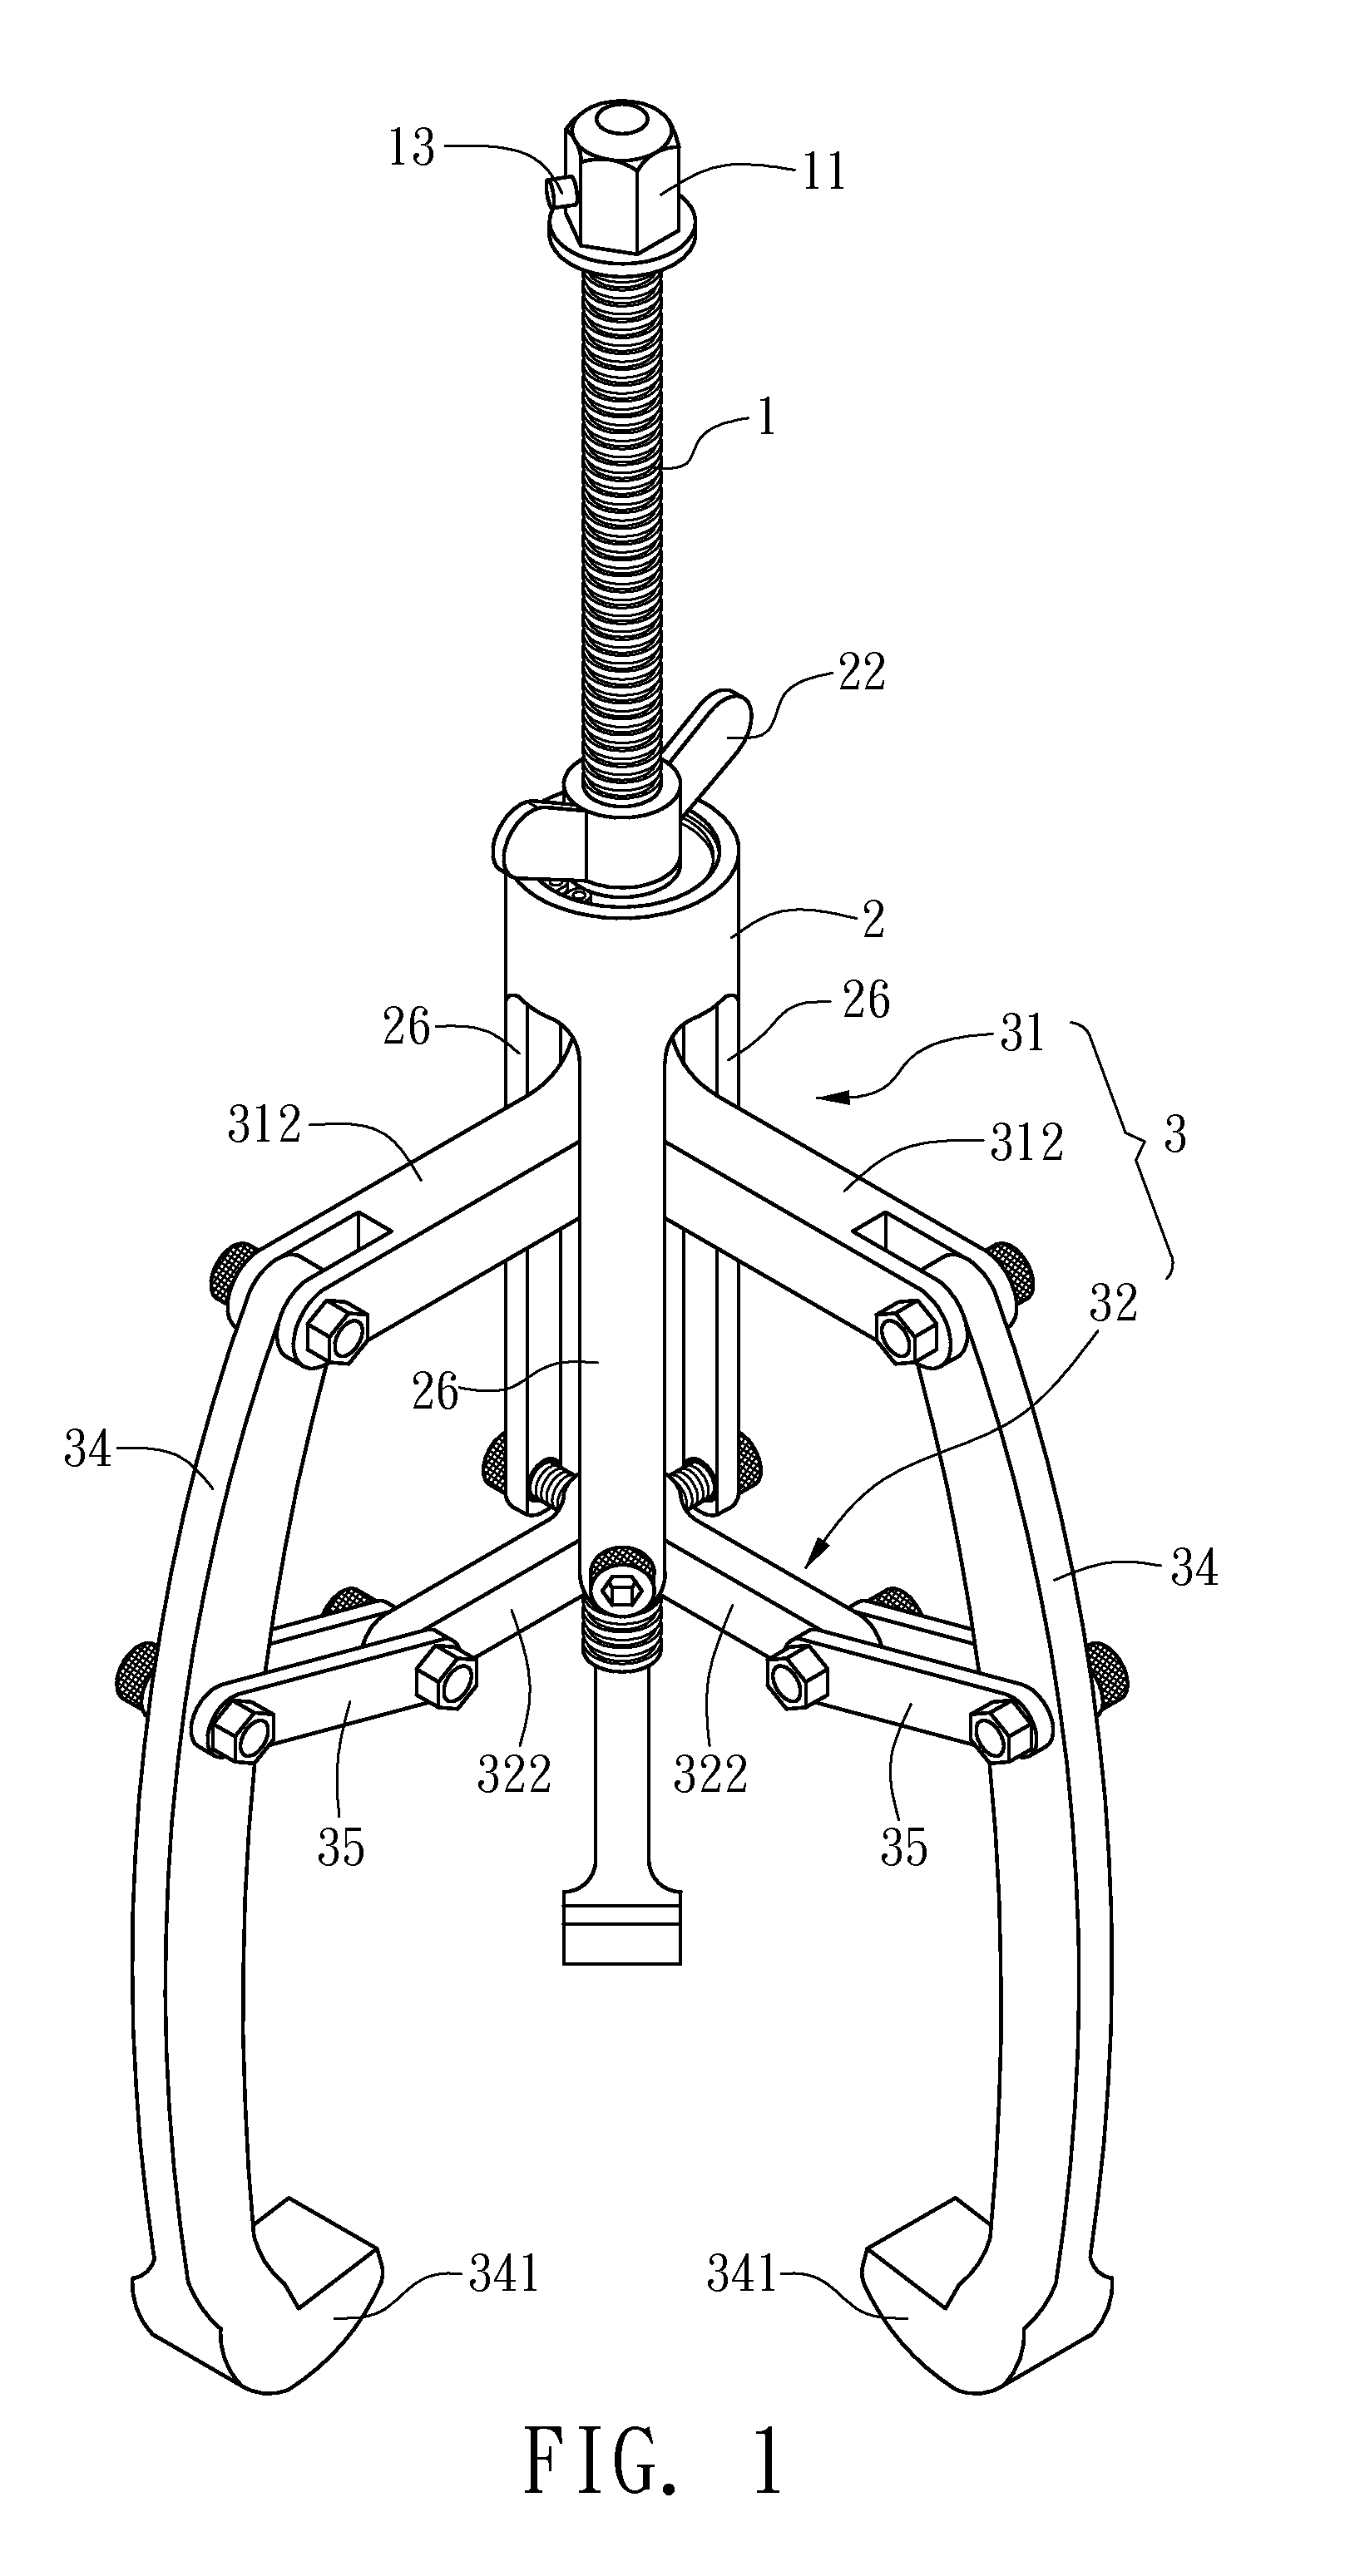 Structure of the Driving Axis of a Puller